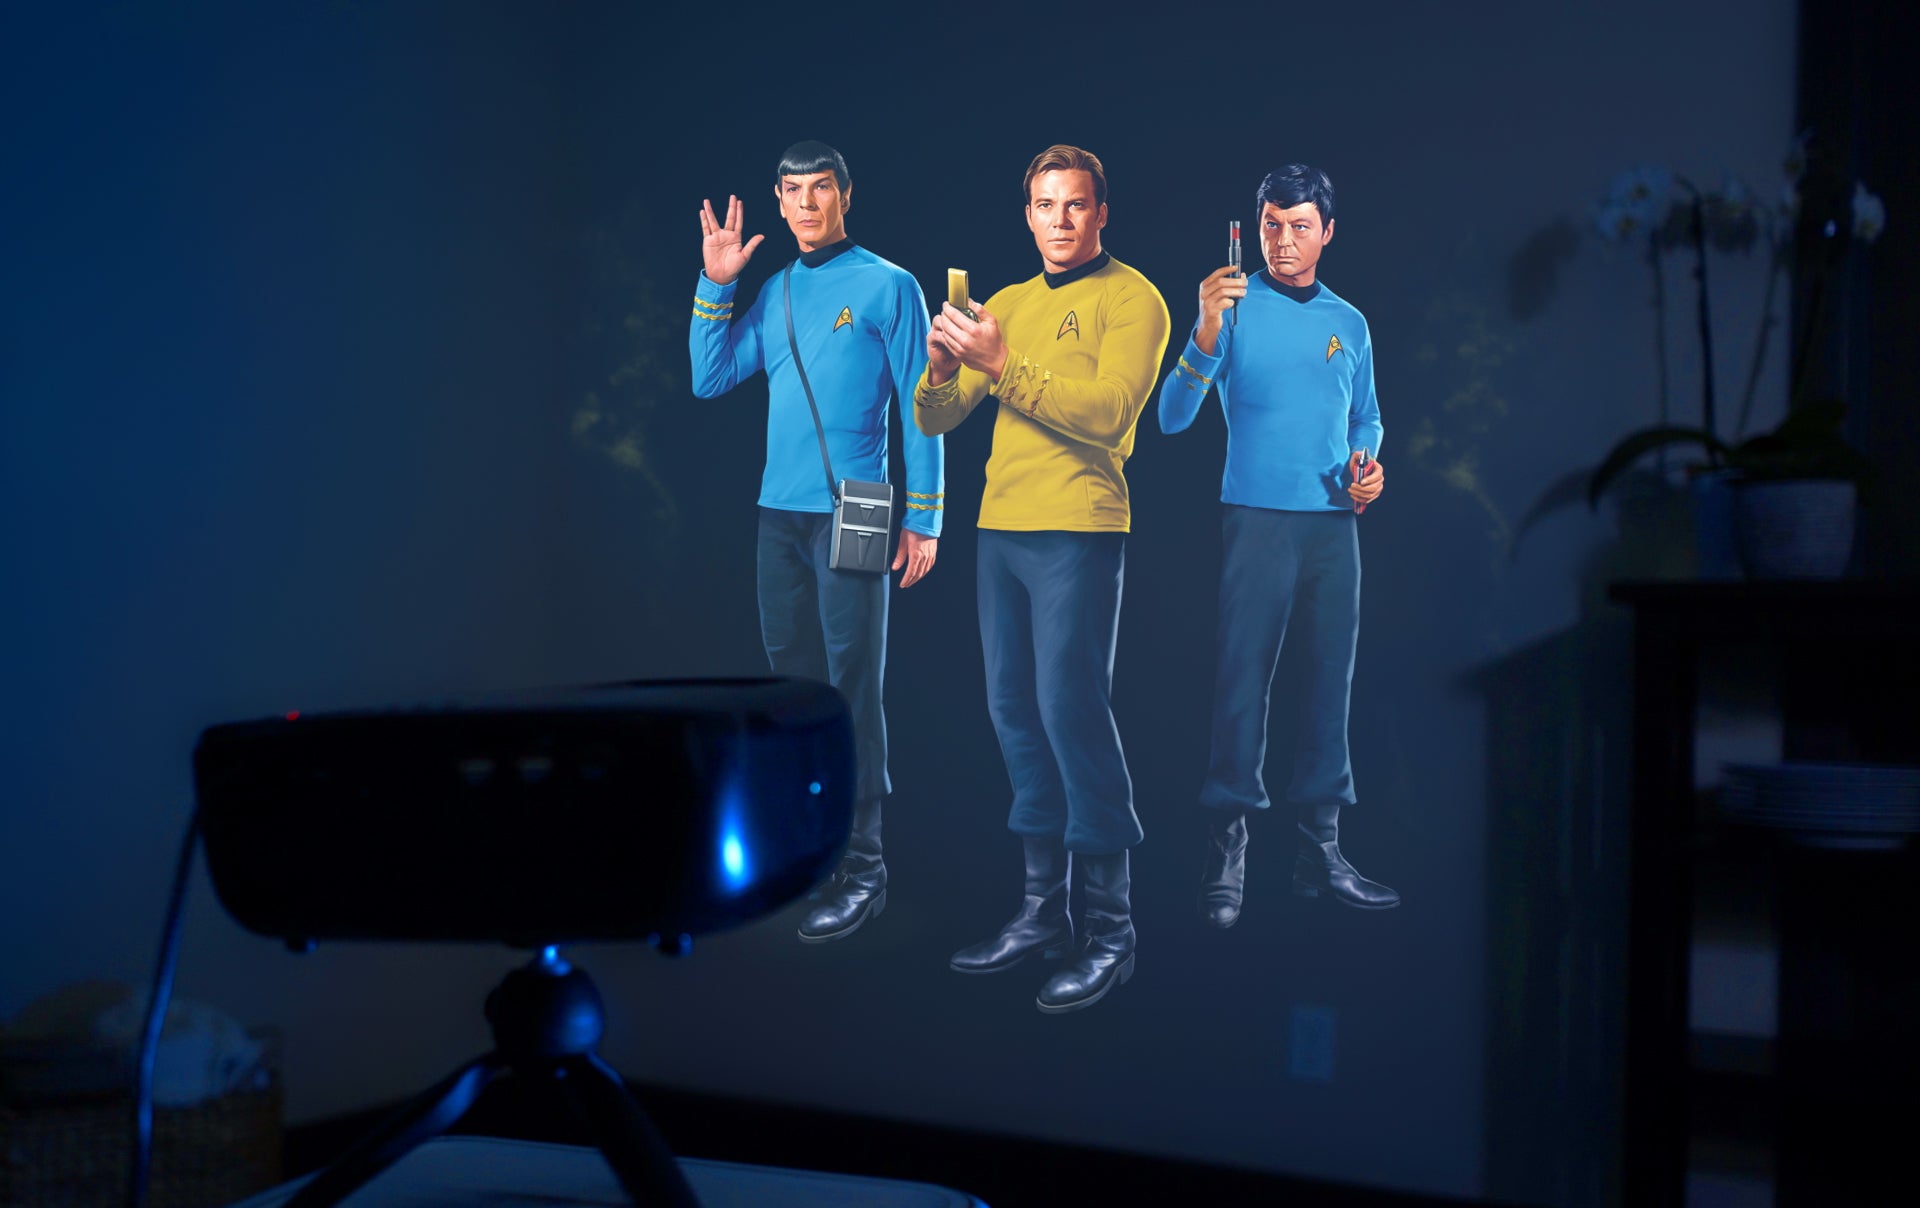 Kirk, Bones, and Spock are on an away mission to your living room wall